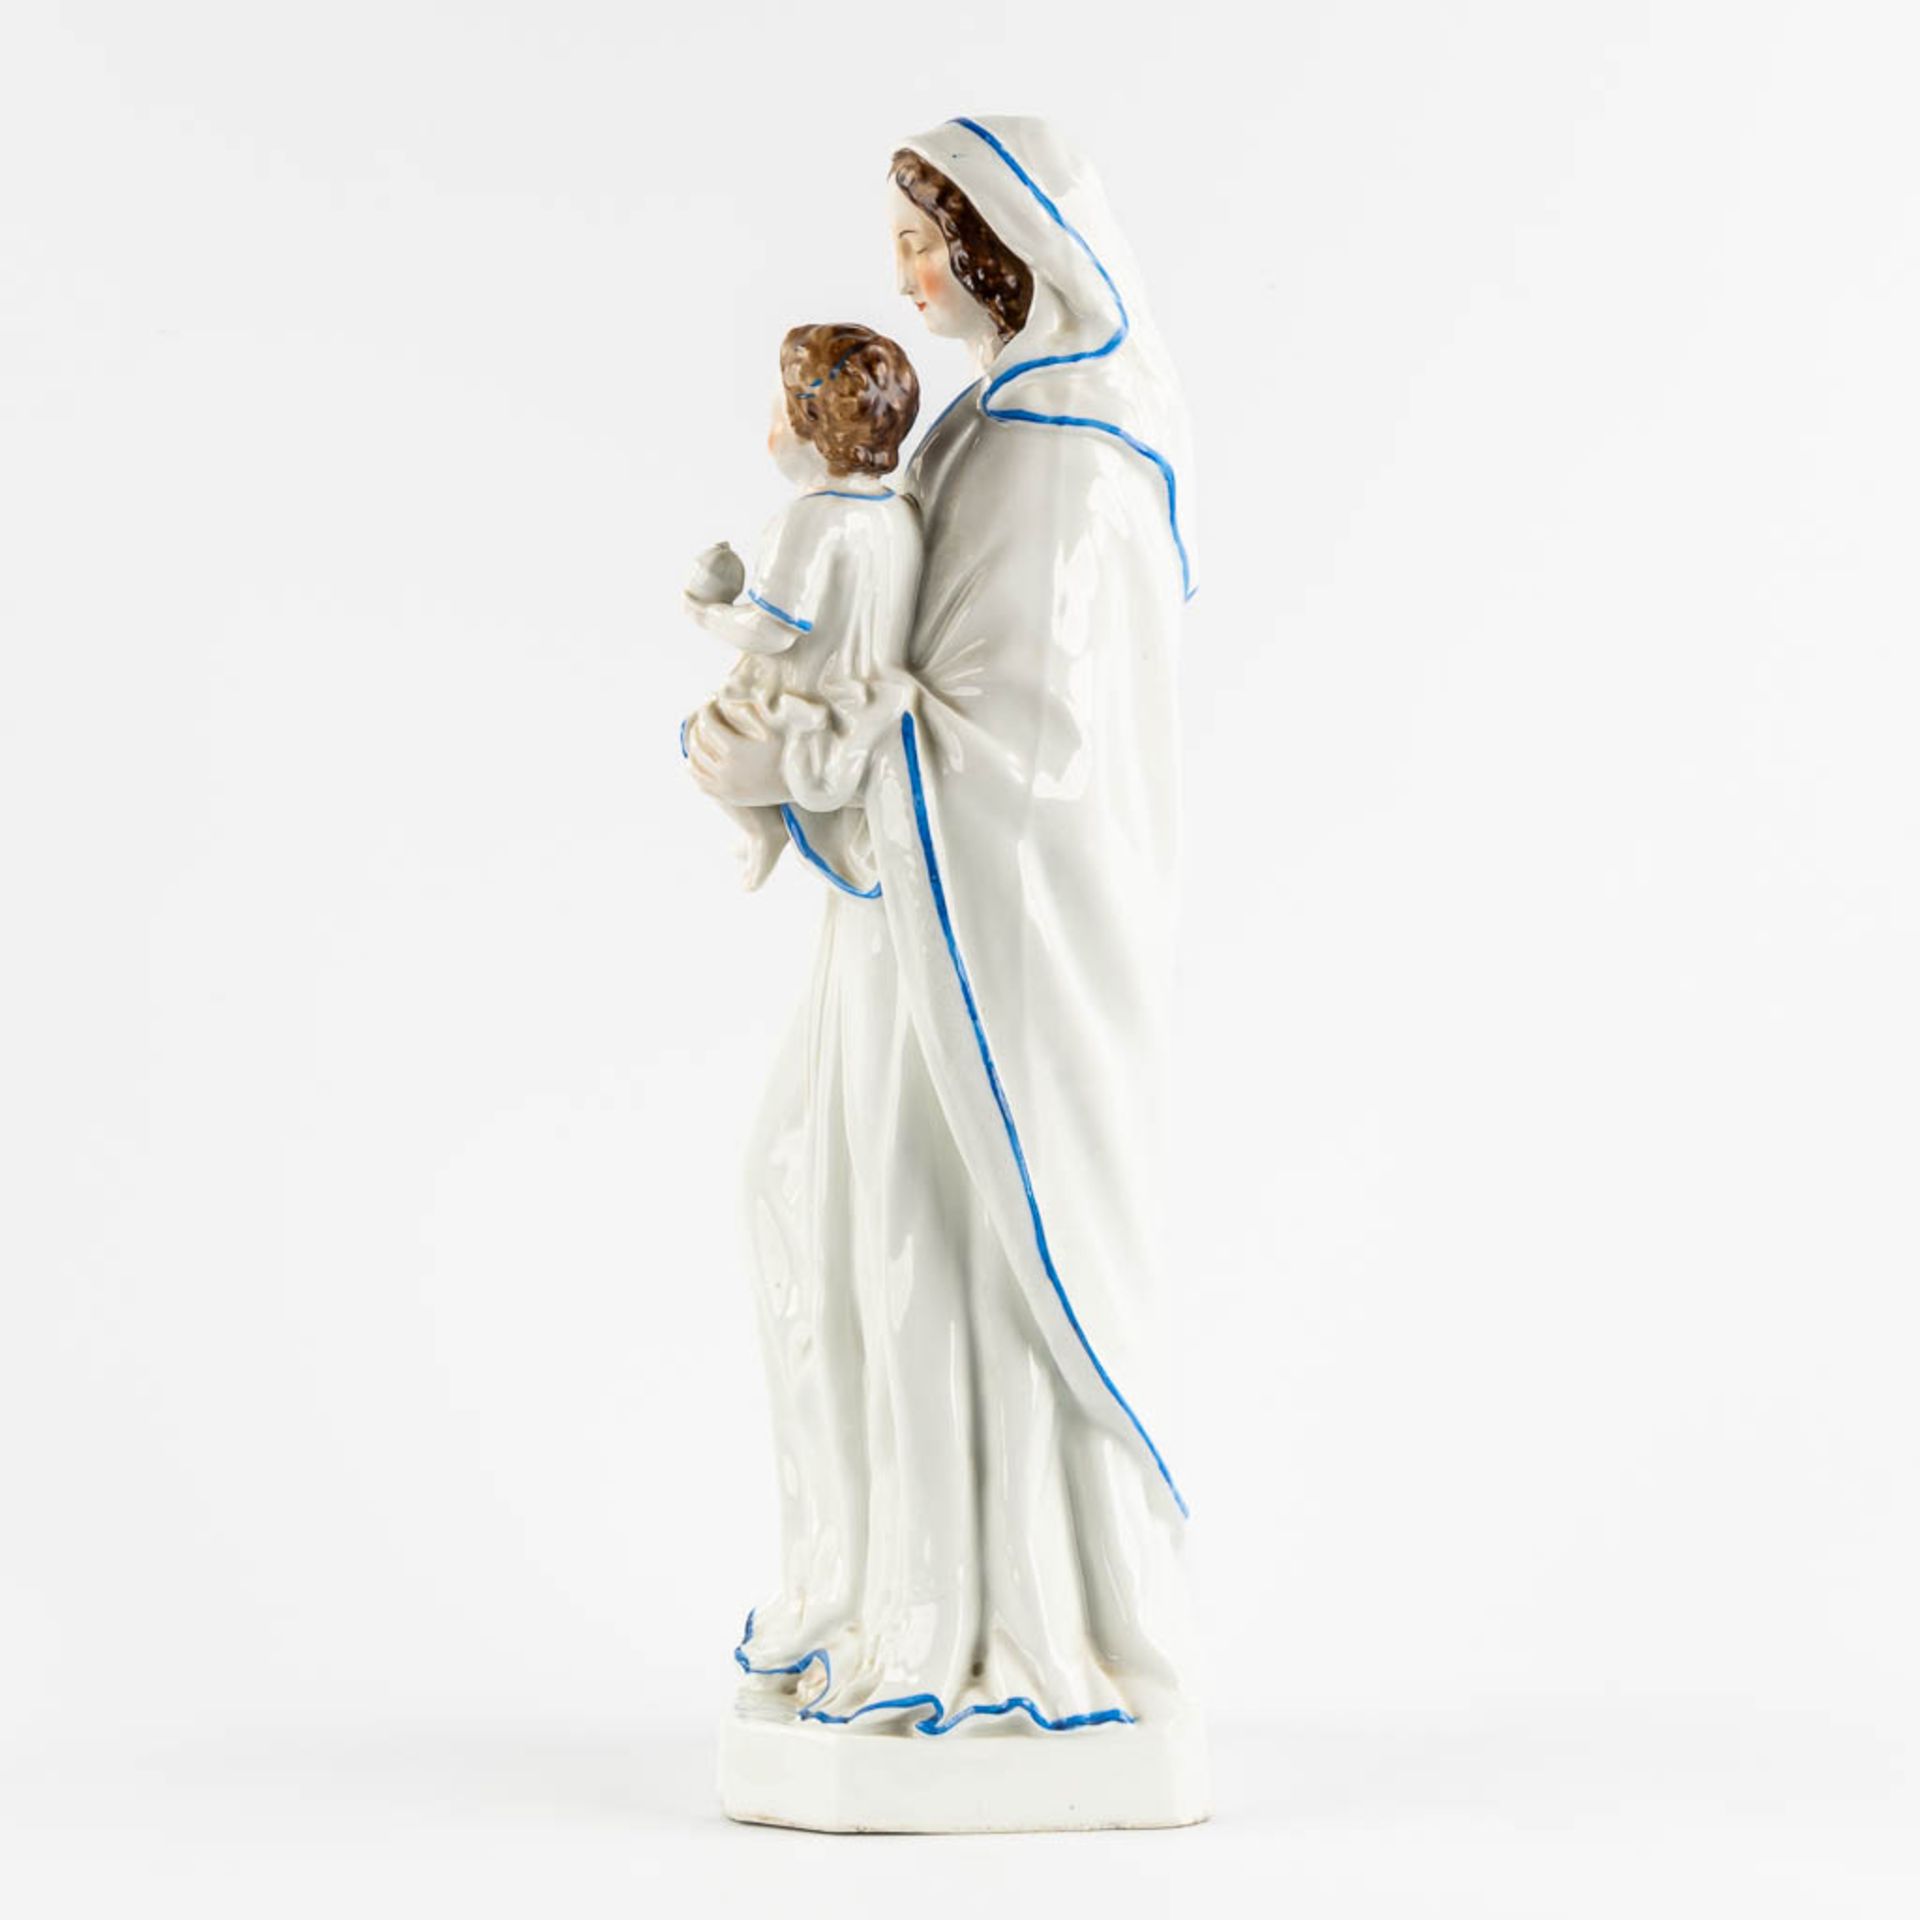 A large figurine of 'Madonna with a child' polychrome porcelain. 19th C. (L:17 x W:21 x H:52 cm) - Image 6 of 11